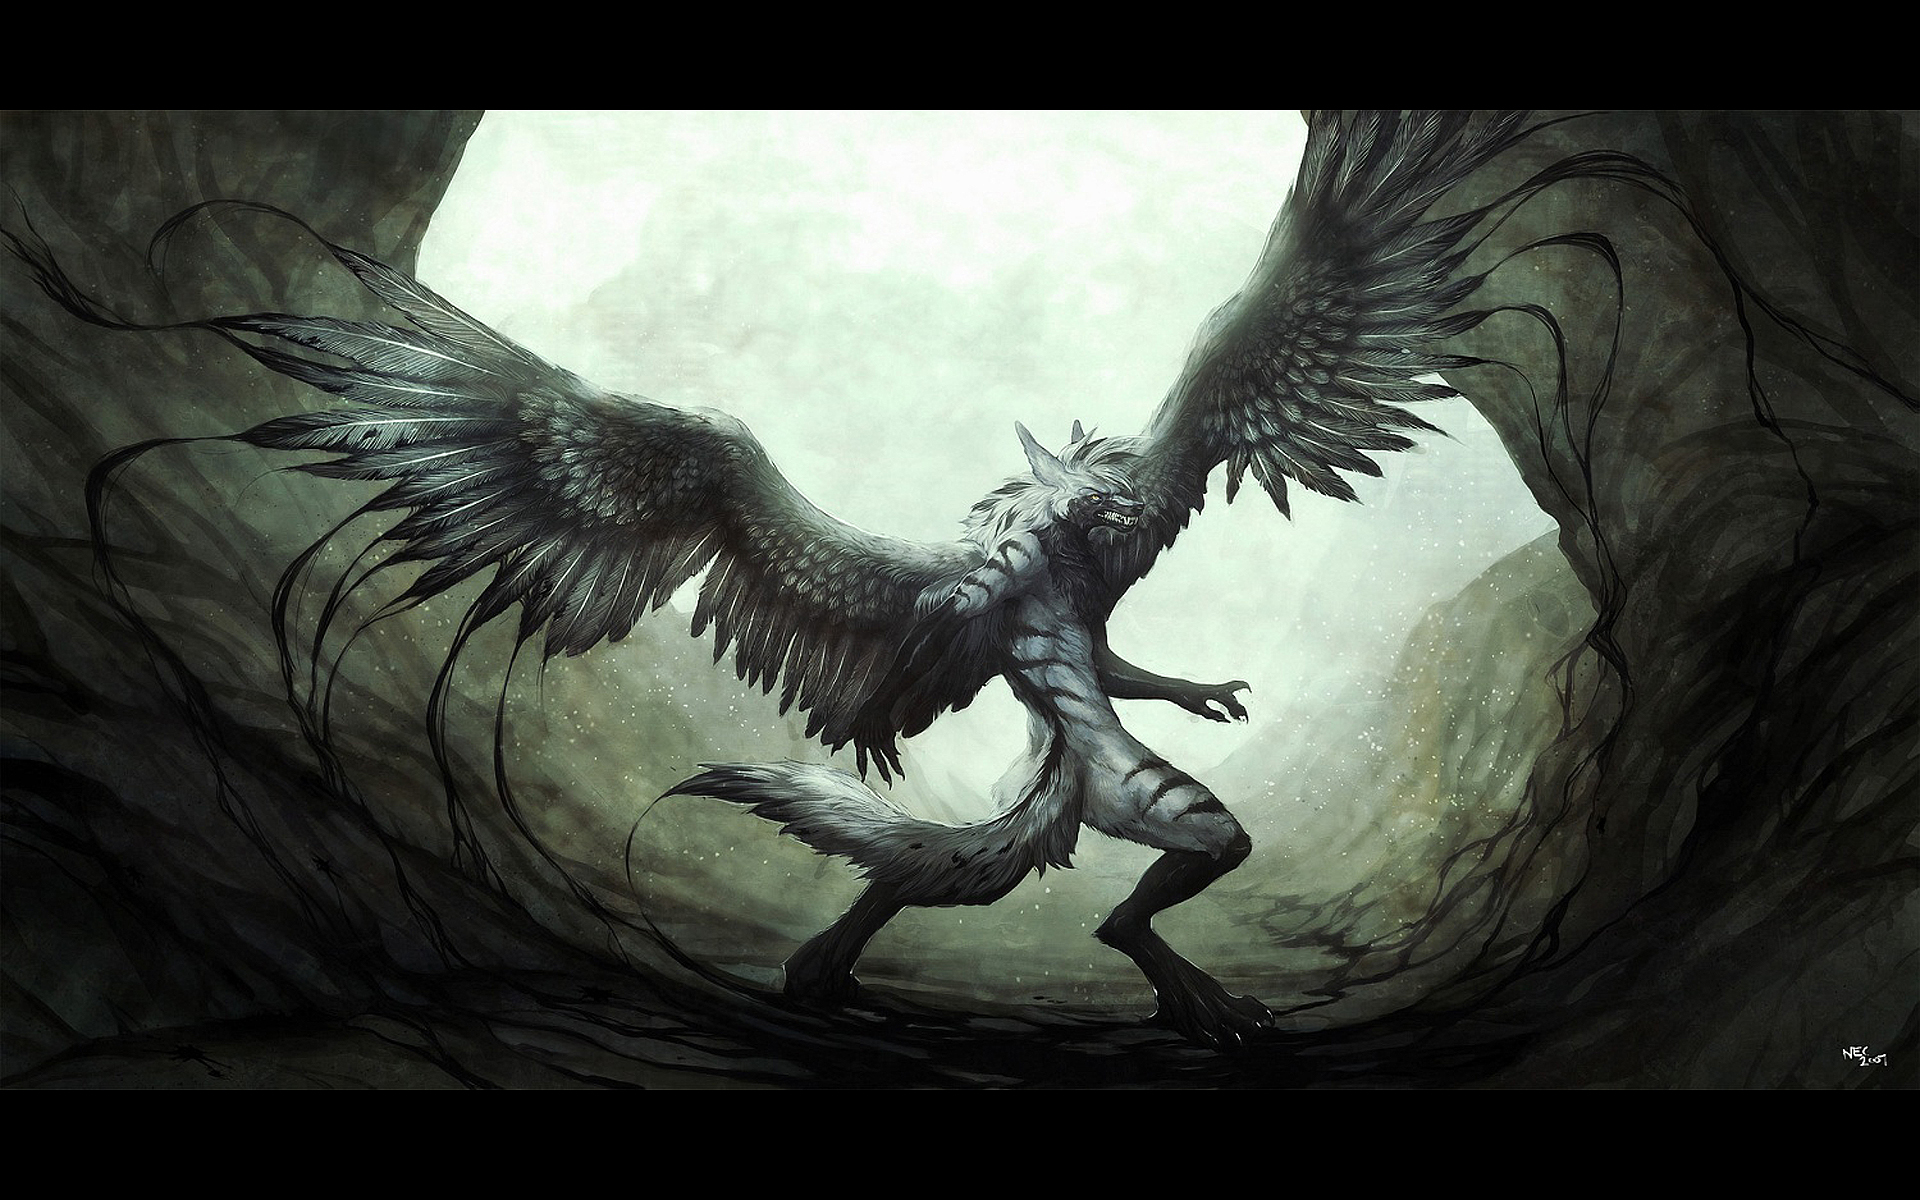 Anime Wolves With Wings Wallpapers